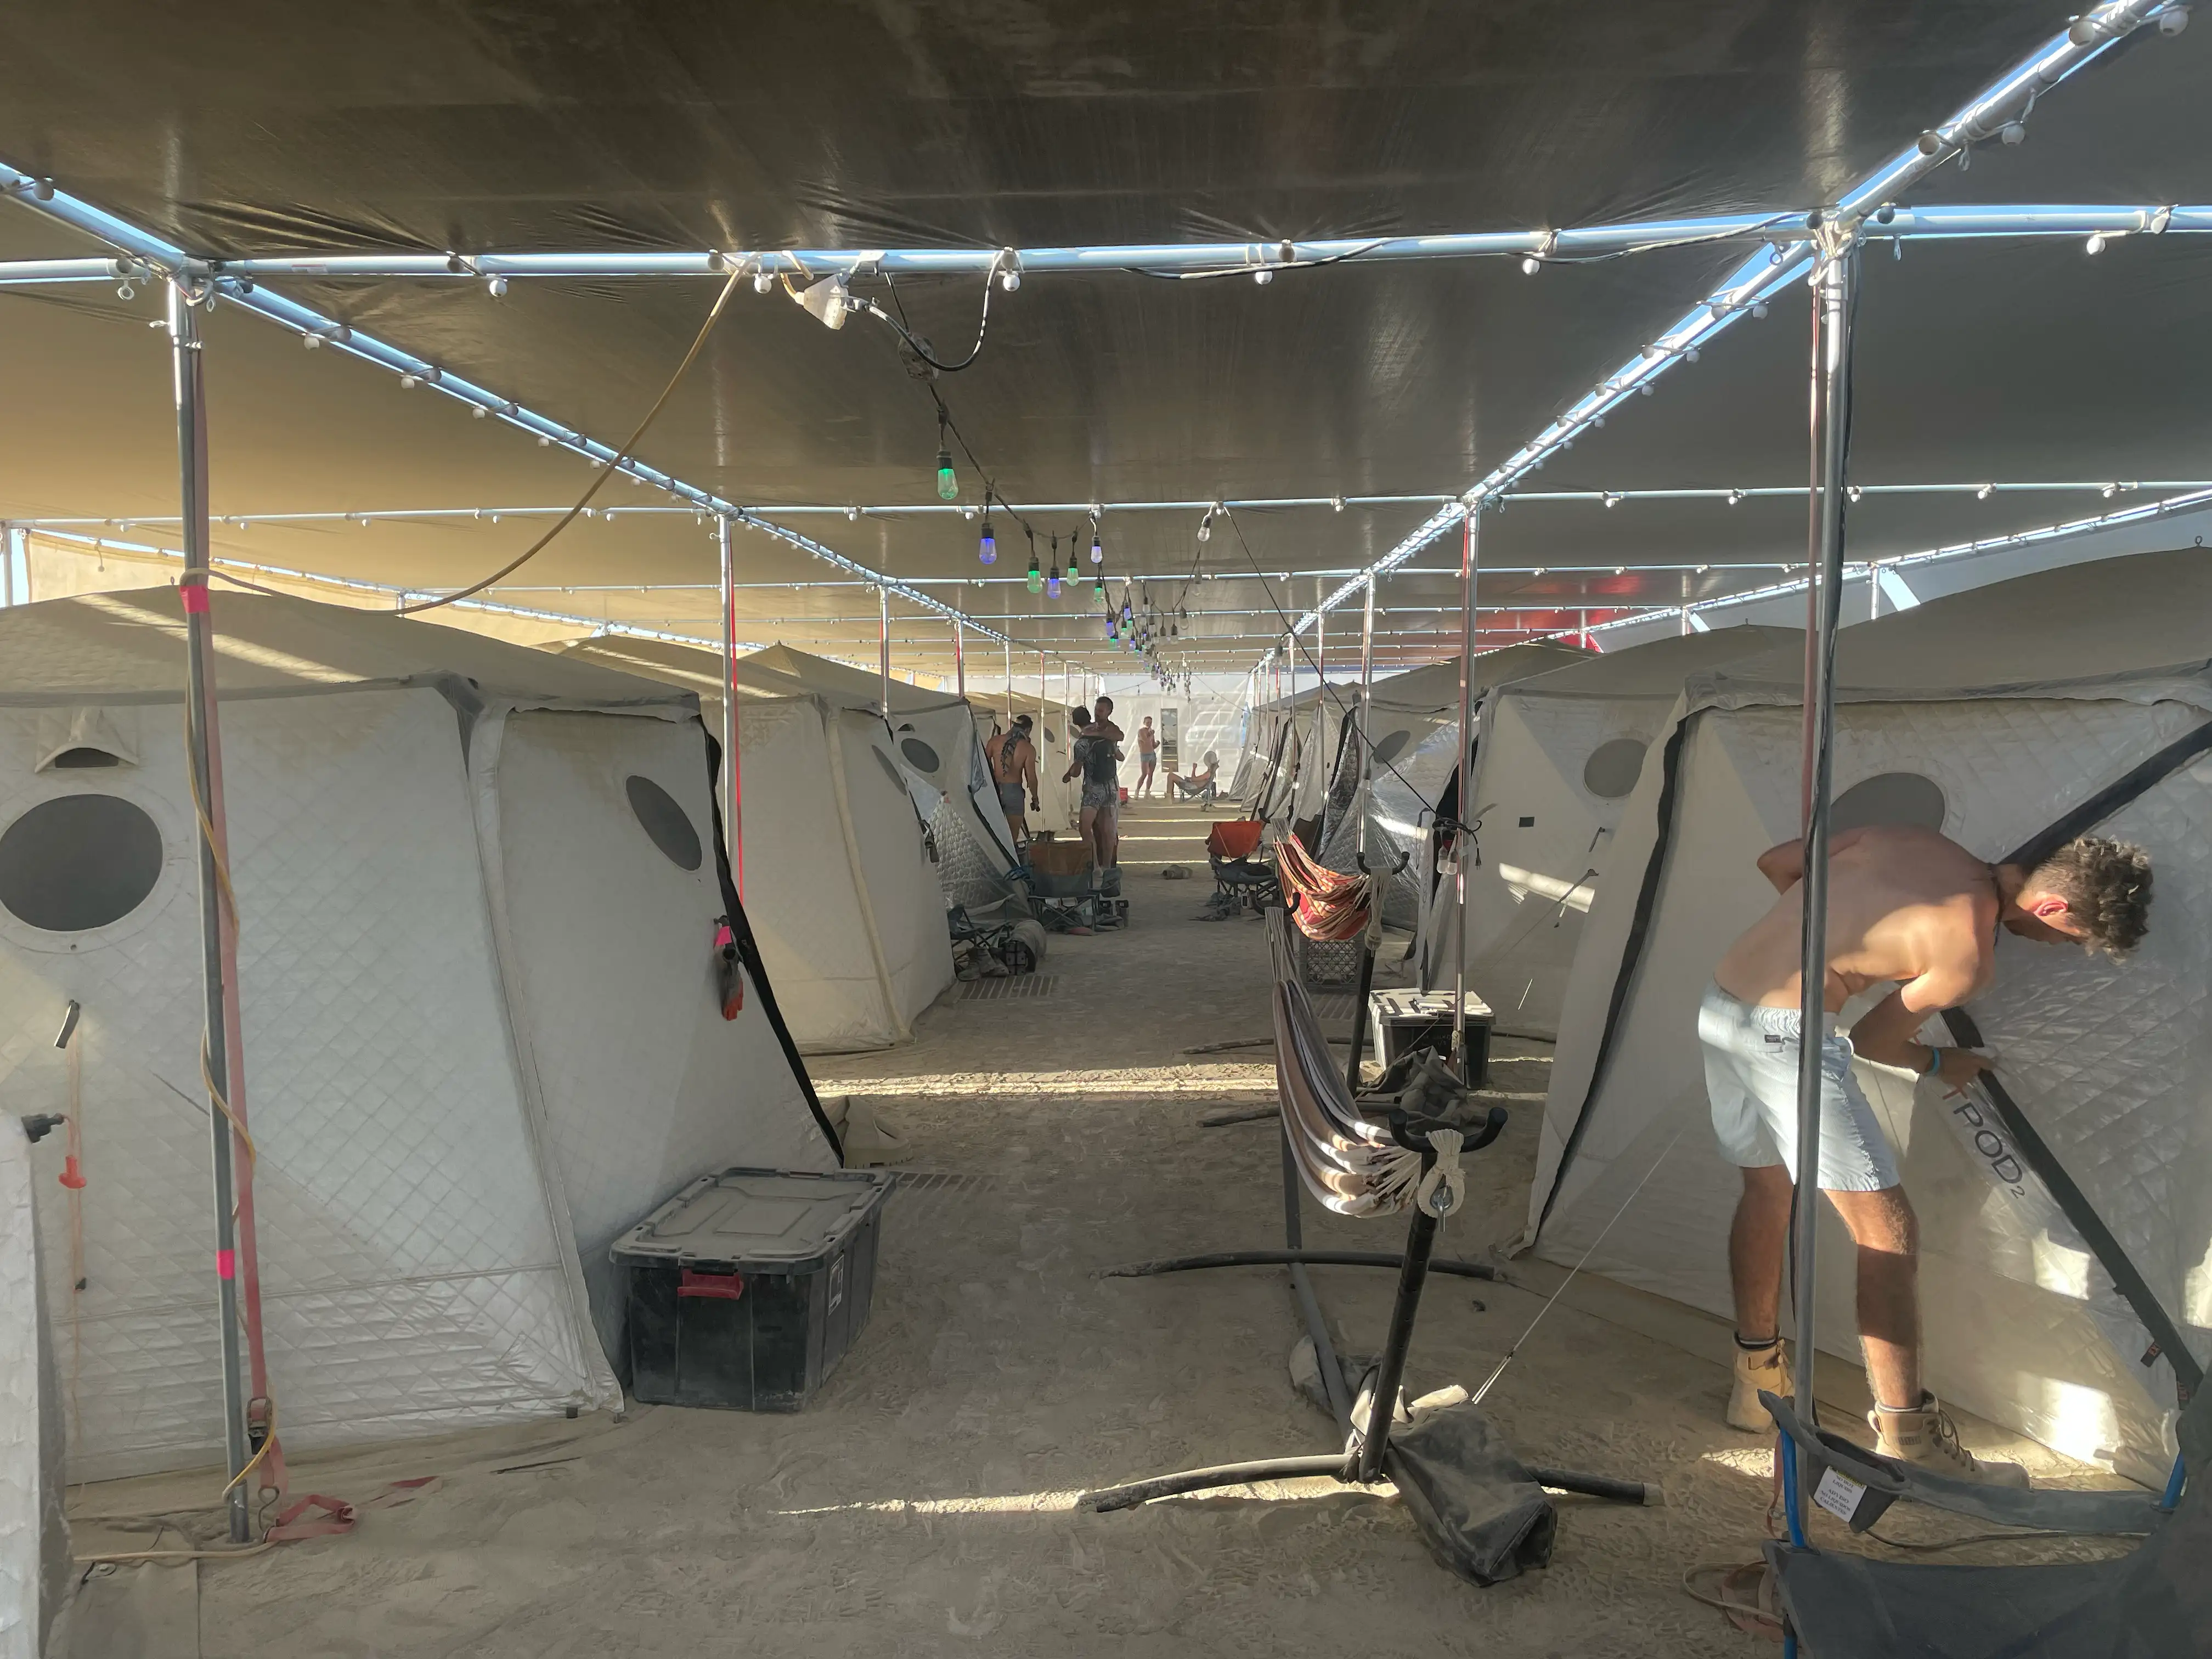 Large shade structure at Burning Man with two rows of tents and an aisle in the middle. The roof is silver tarp with a string of colored lights. Each tent is a ShiftPod 2, hexagonal shaped, just high enough to stand in and with room for two people. In the foreground, a shirtless man is unzipping the door to a tent. There are several hammocks and other camping furniture strewn around. The ground is dirt. The sun is extremely strong but the shade keeps most of it out.